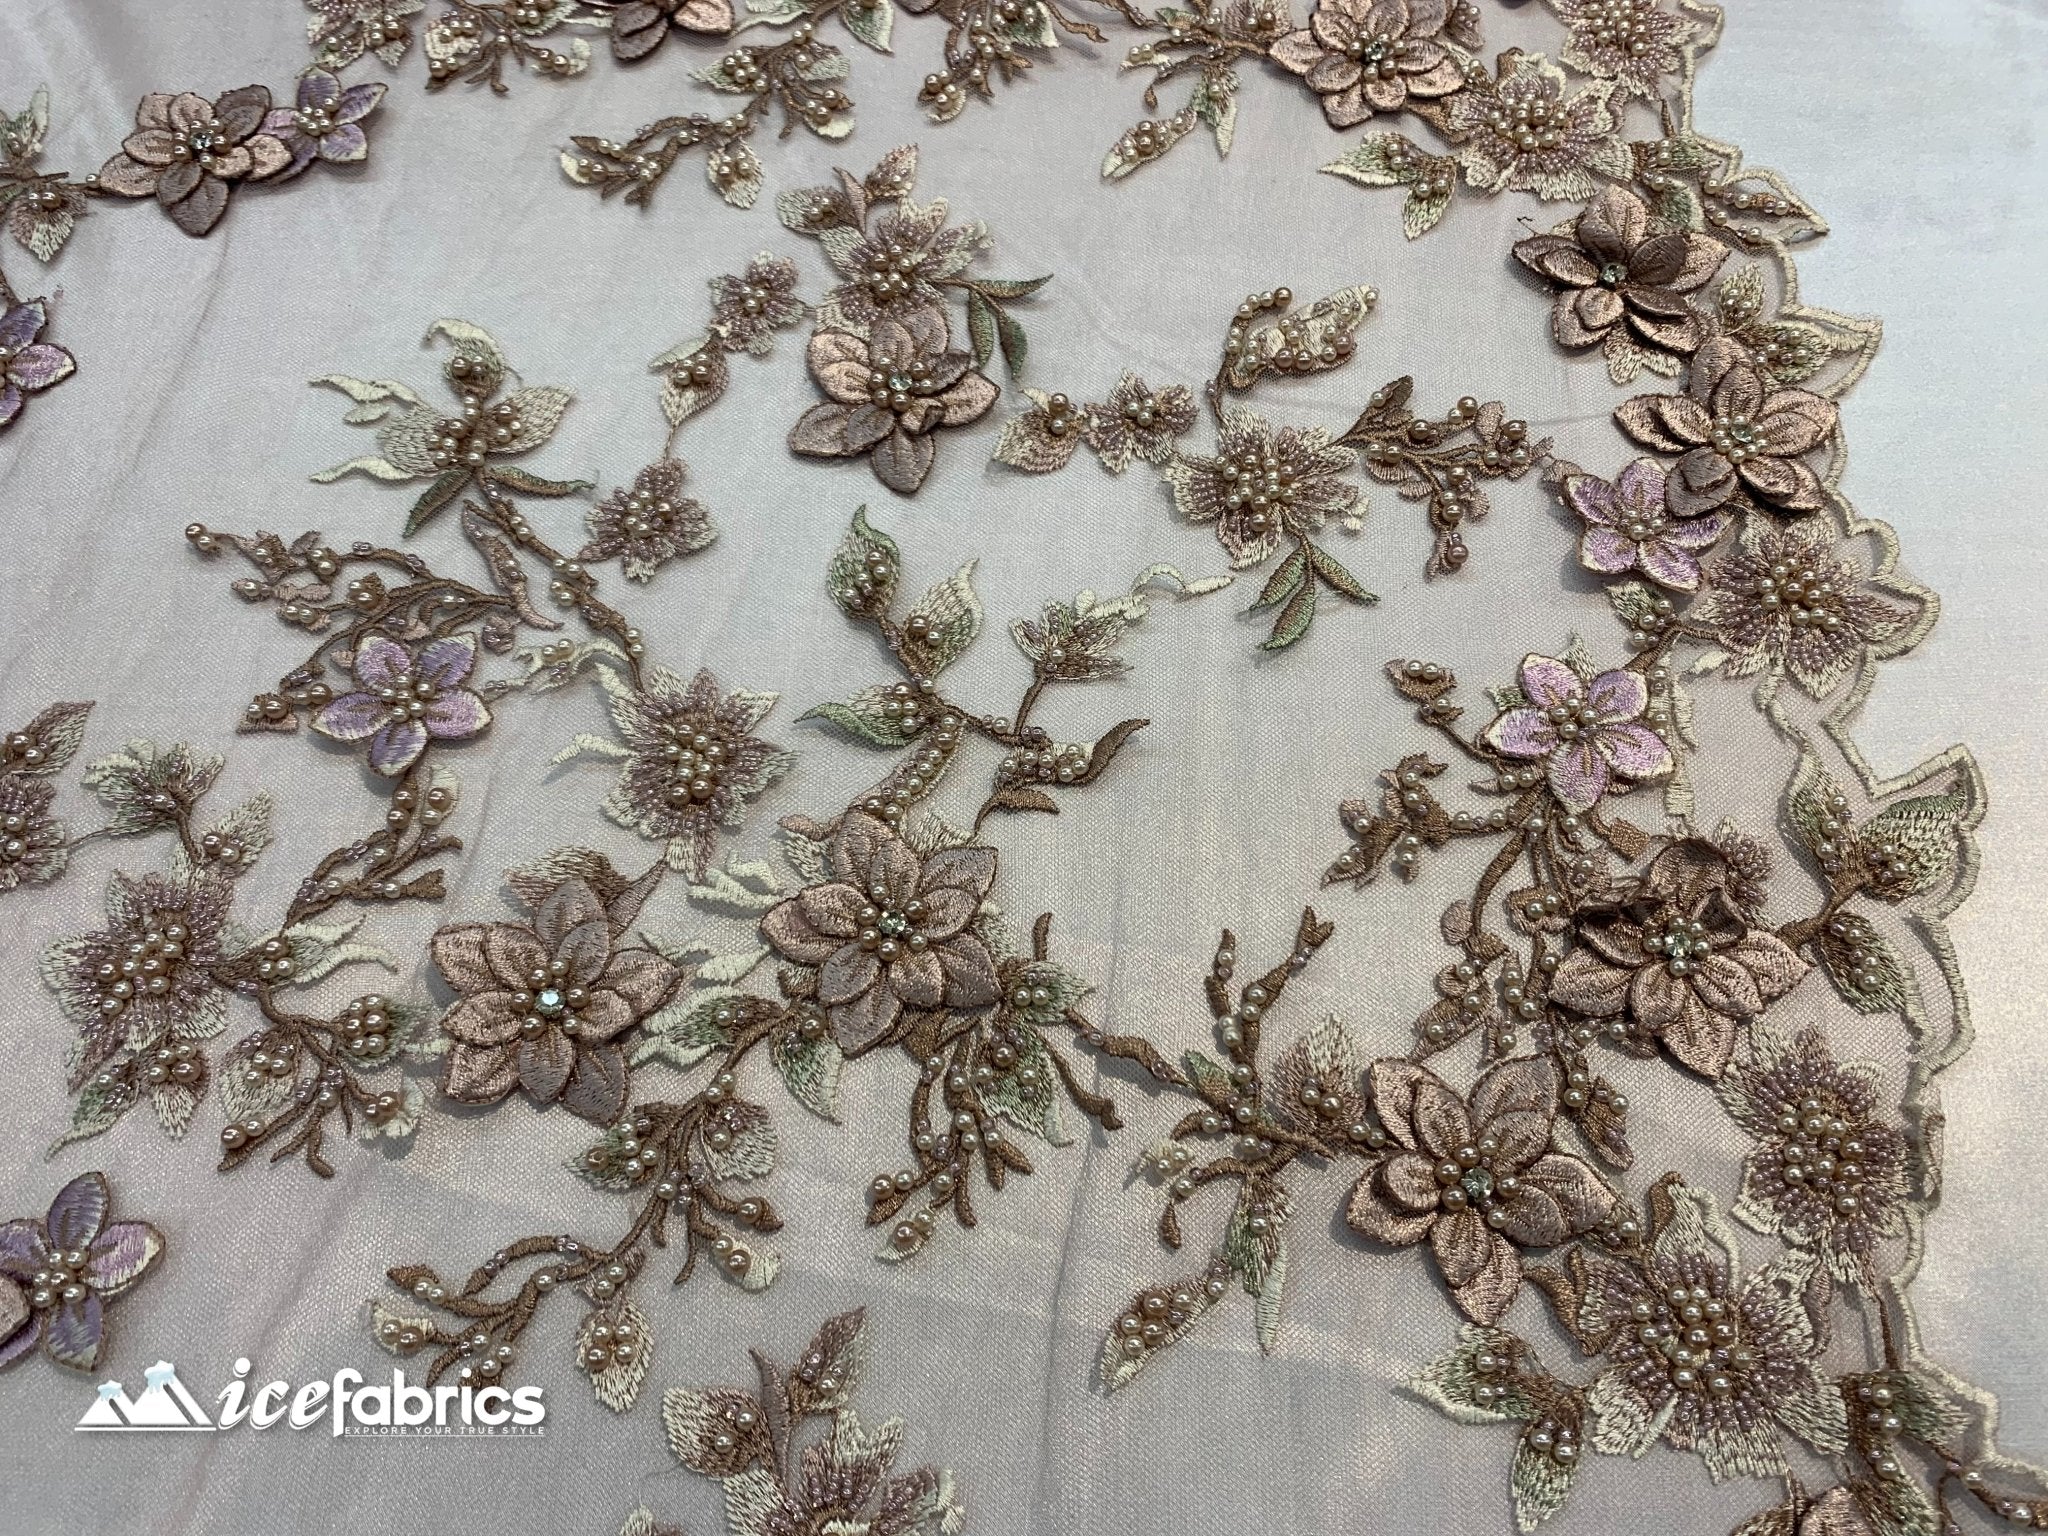 Embroidered Fabric/ 3D Flowers Beaded Fabric/ Lace Fabric/ Rose GoldICE FABRICSICE FABRICSRose GoldEmbroidered Fabric/ 3D Flowers Beaded Fabric/ Lace Fabric/ Rose Gold ICE FABRICS